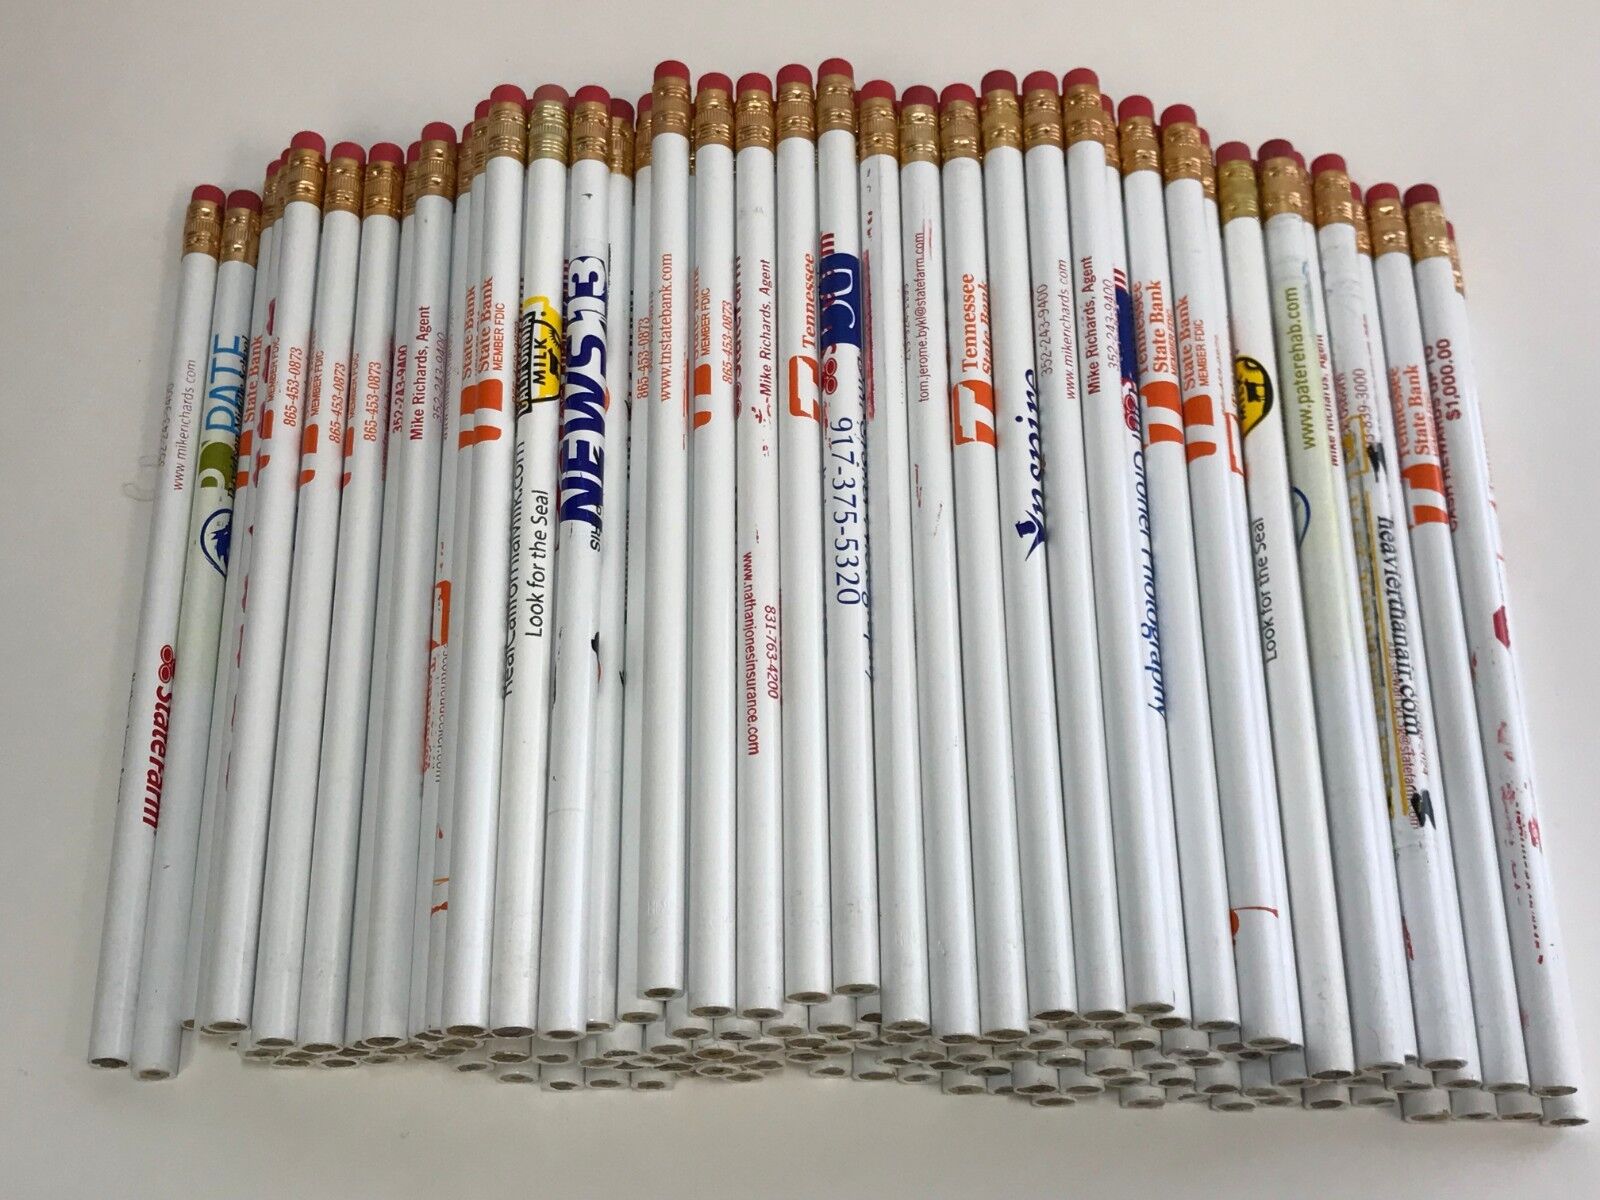 144 Lot Misprint WHITE Pencils with Rubber Eraser #2 Lead, Bulk Wholesale Lot  Unbranded/Generic Does Not Apply